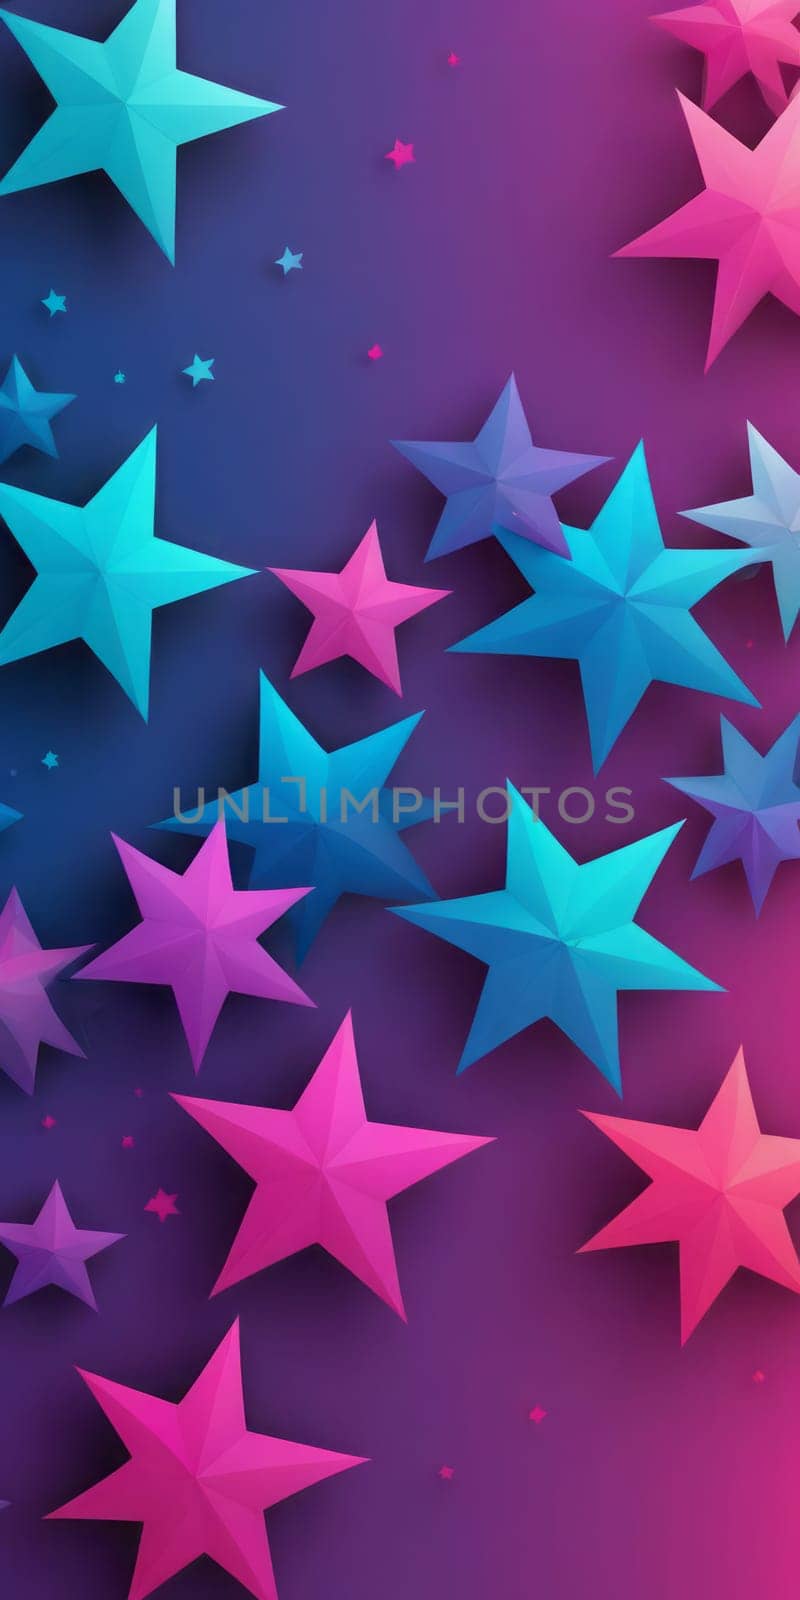 Star Shapes in Fuchsia and Blue by nkotlyar